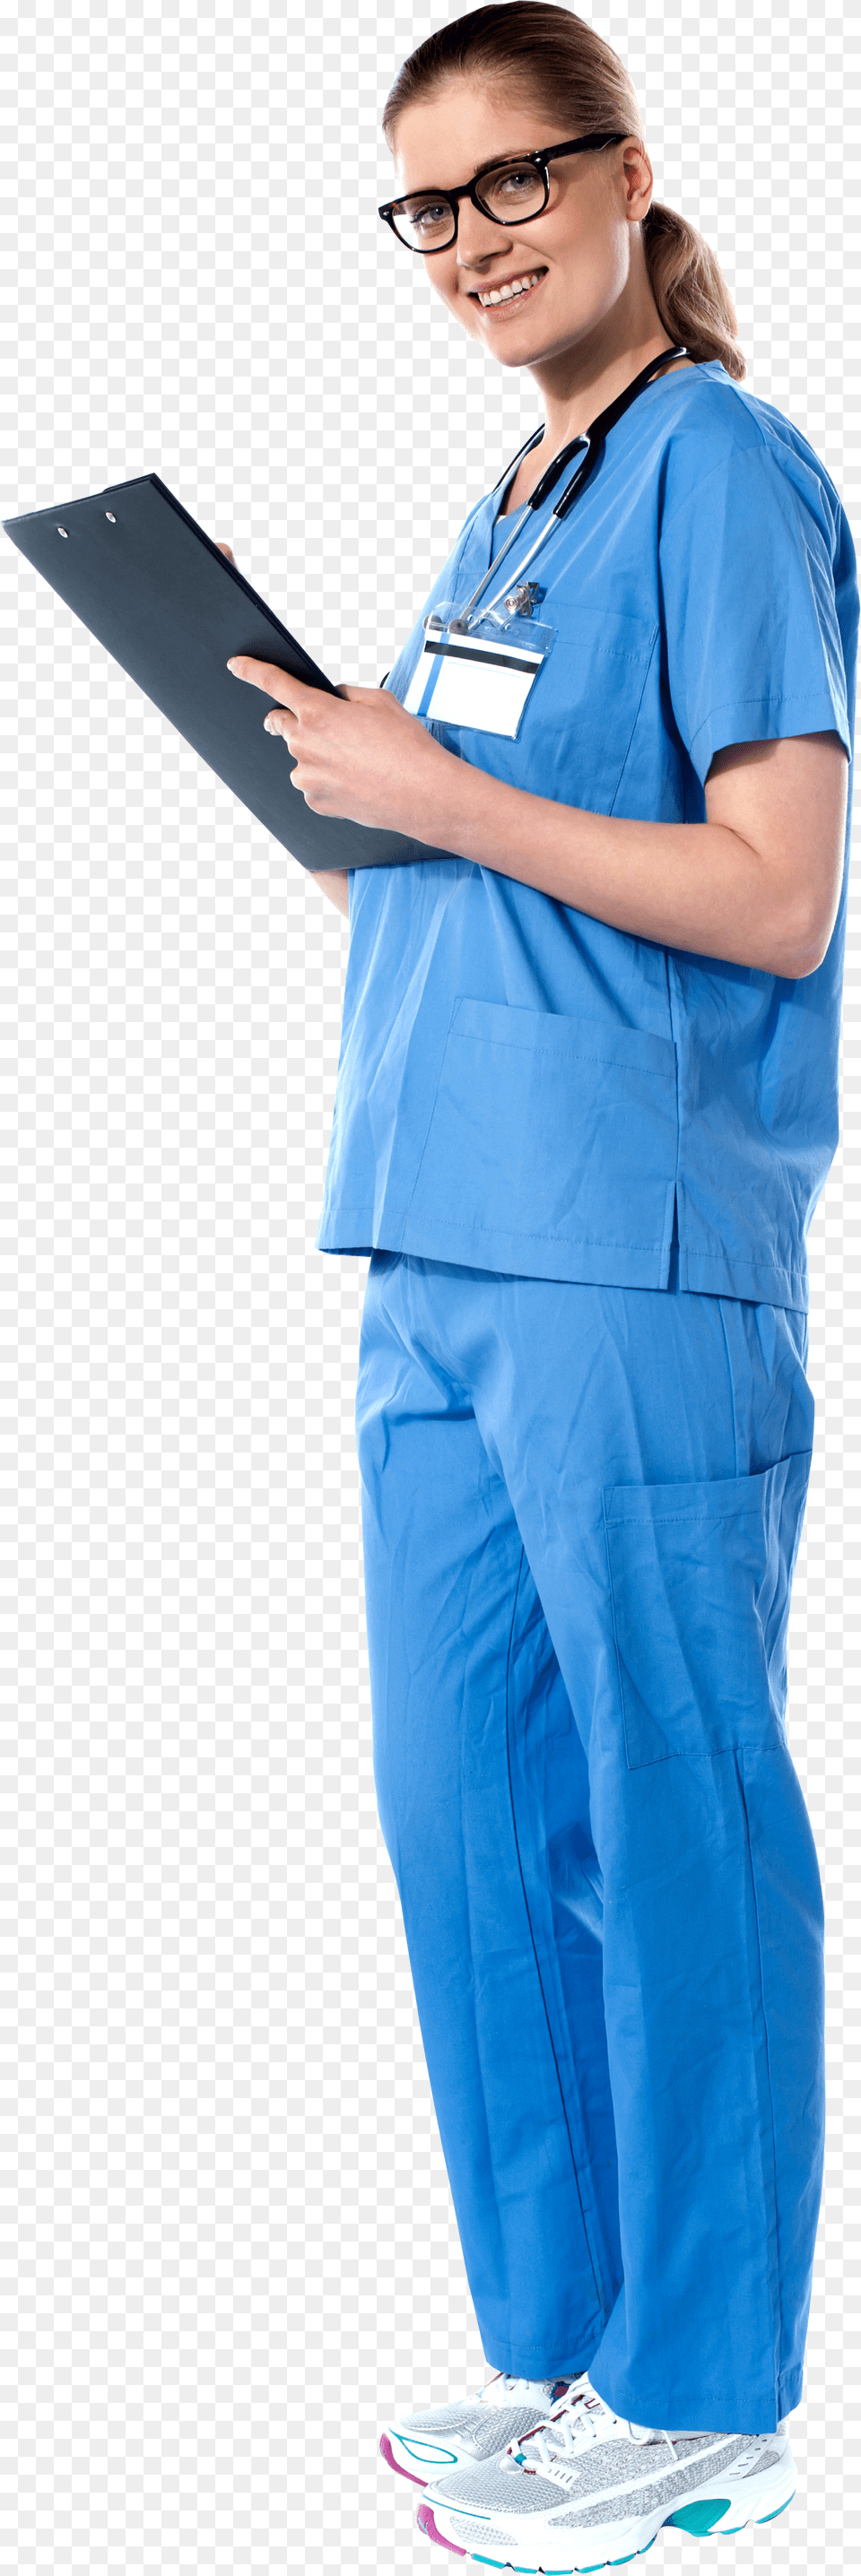 Women Doctor Lady Doctor With Stethoscope Free Transparent Png